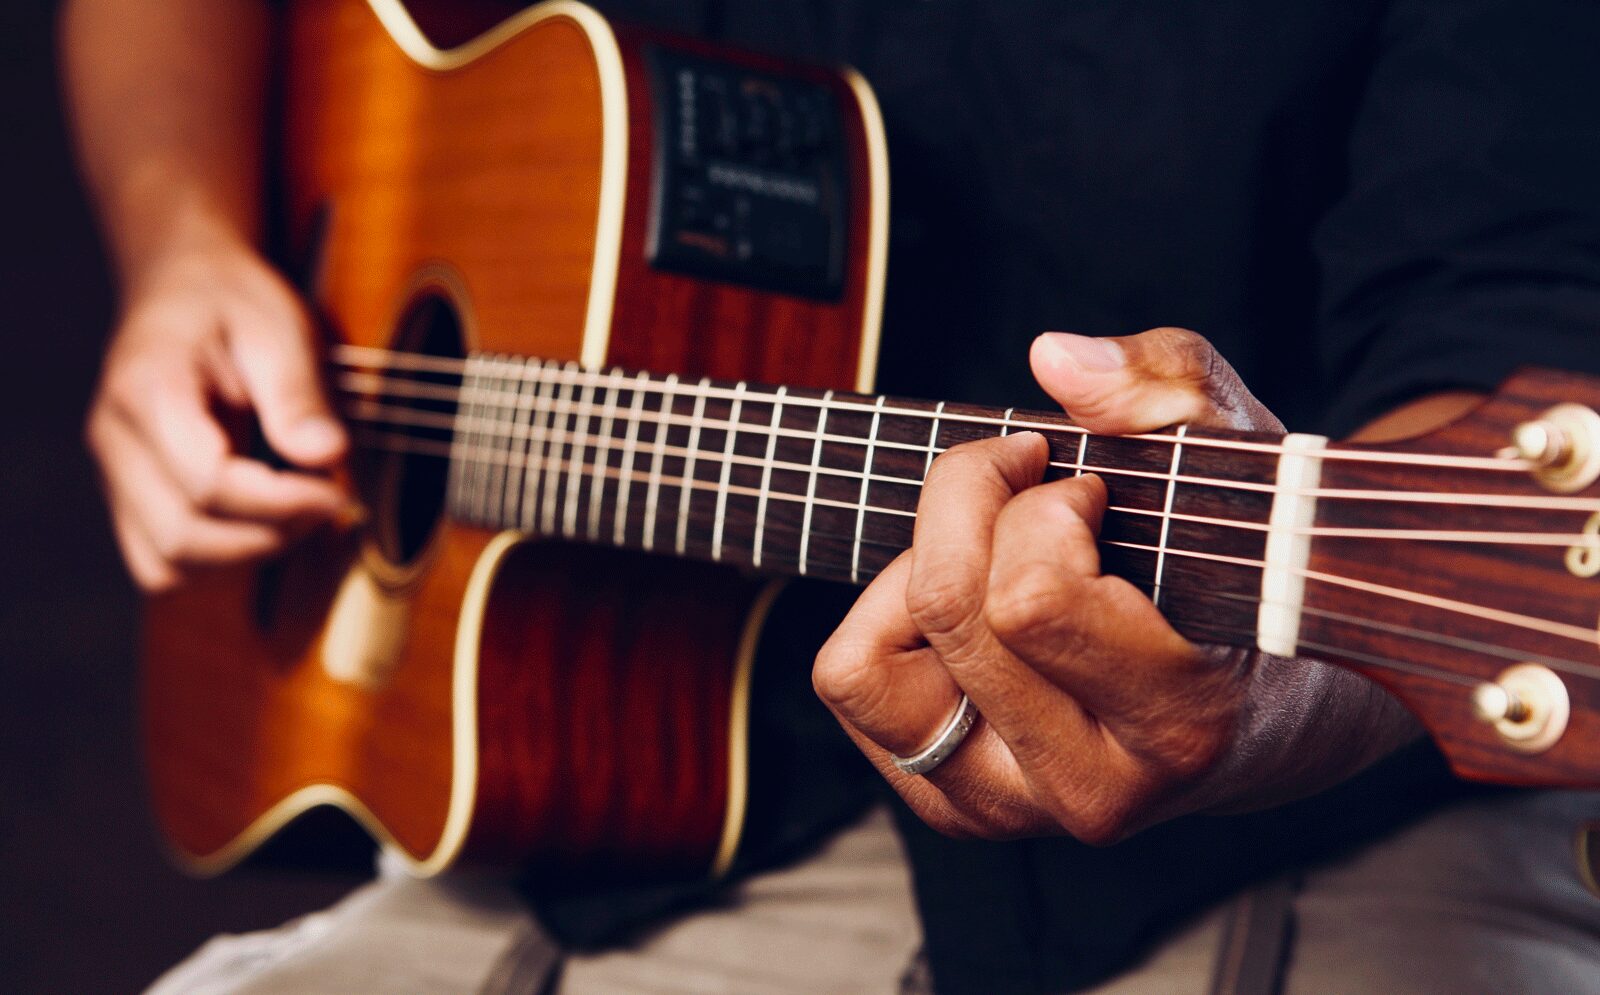 How To Play An Acoustic Guitar